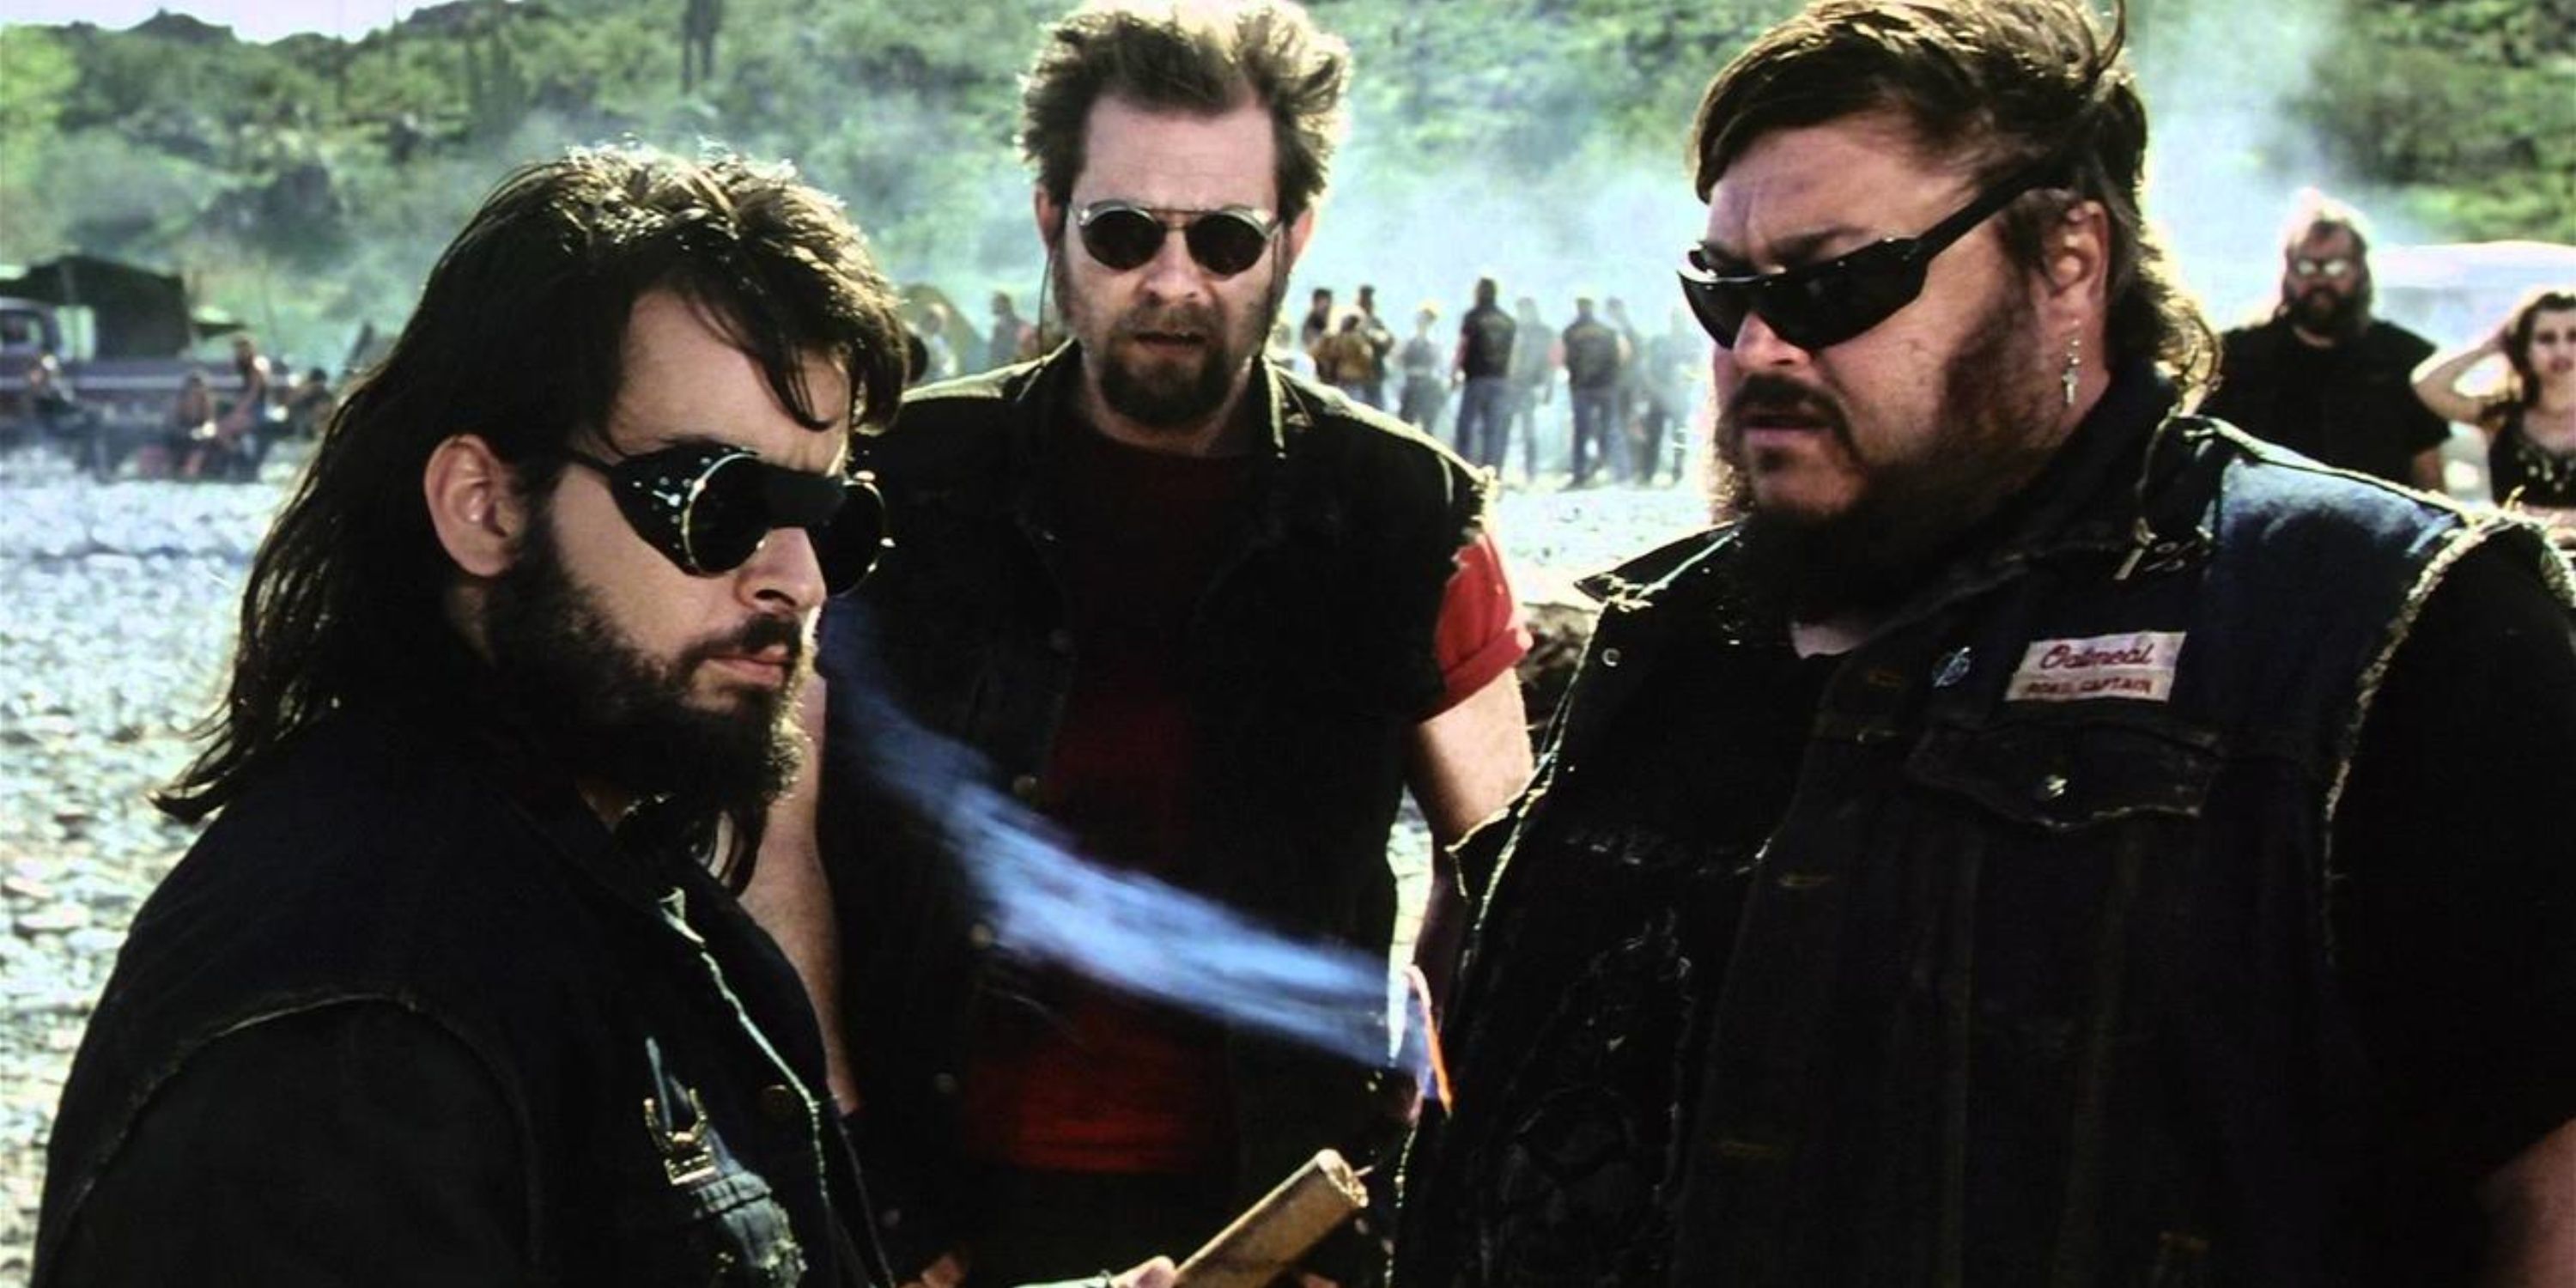 A group of bikers in Beyond the Law